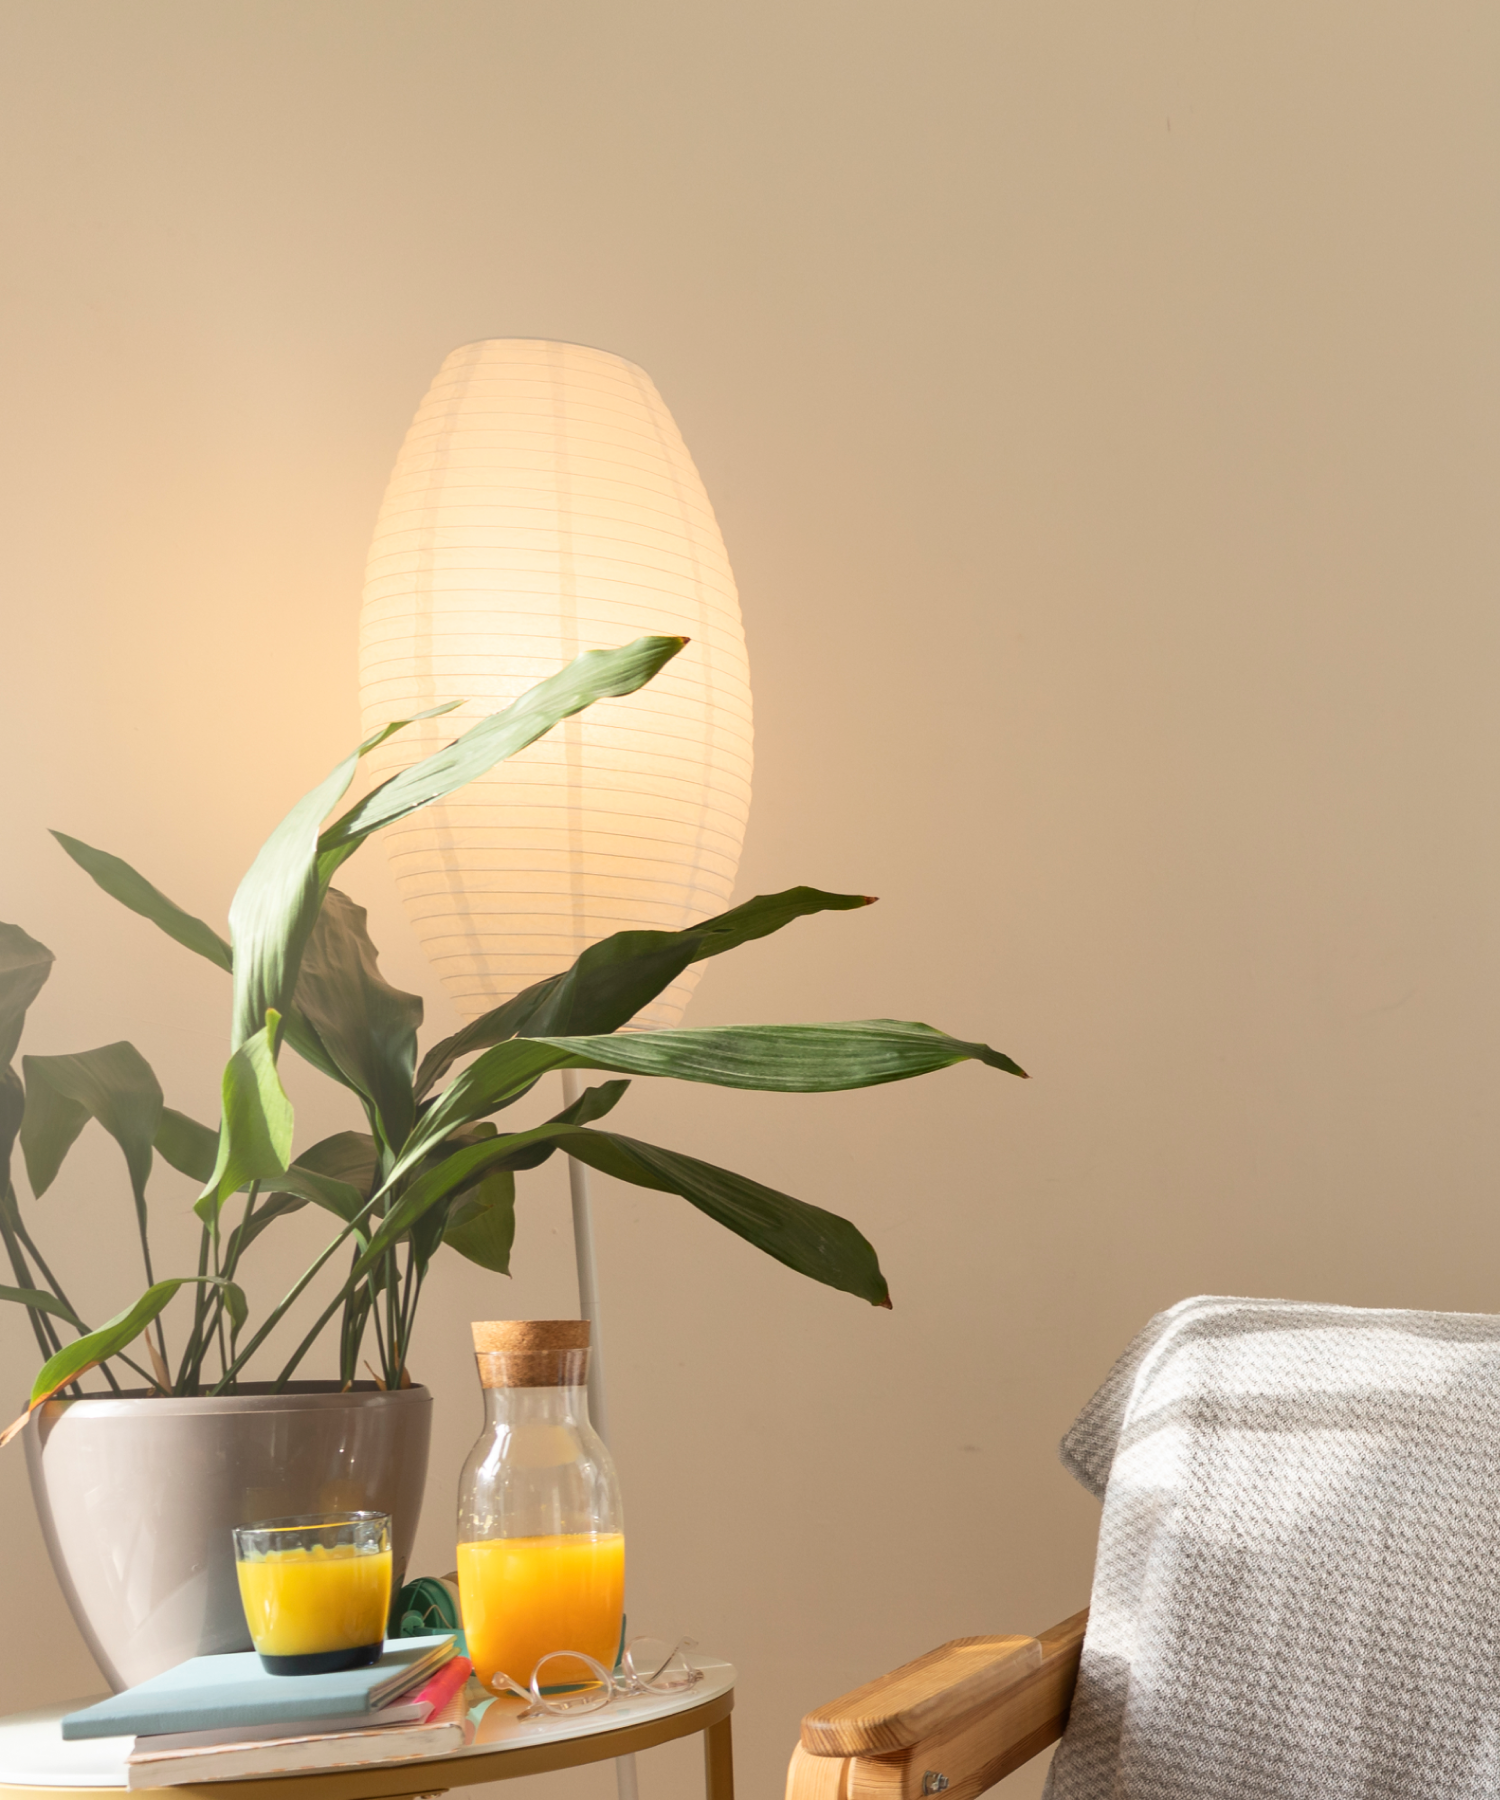 Cozy Lighting with Sengled Bulbs - Ideal for Indoor Settings